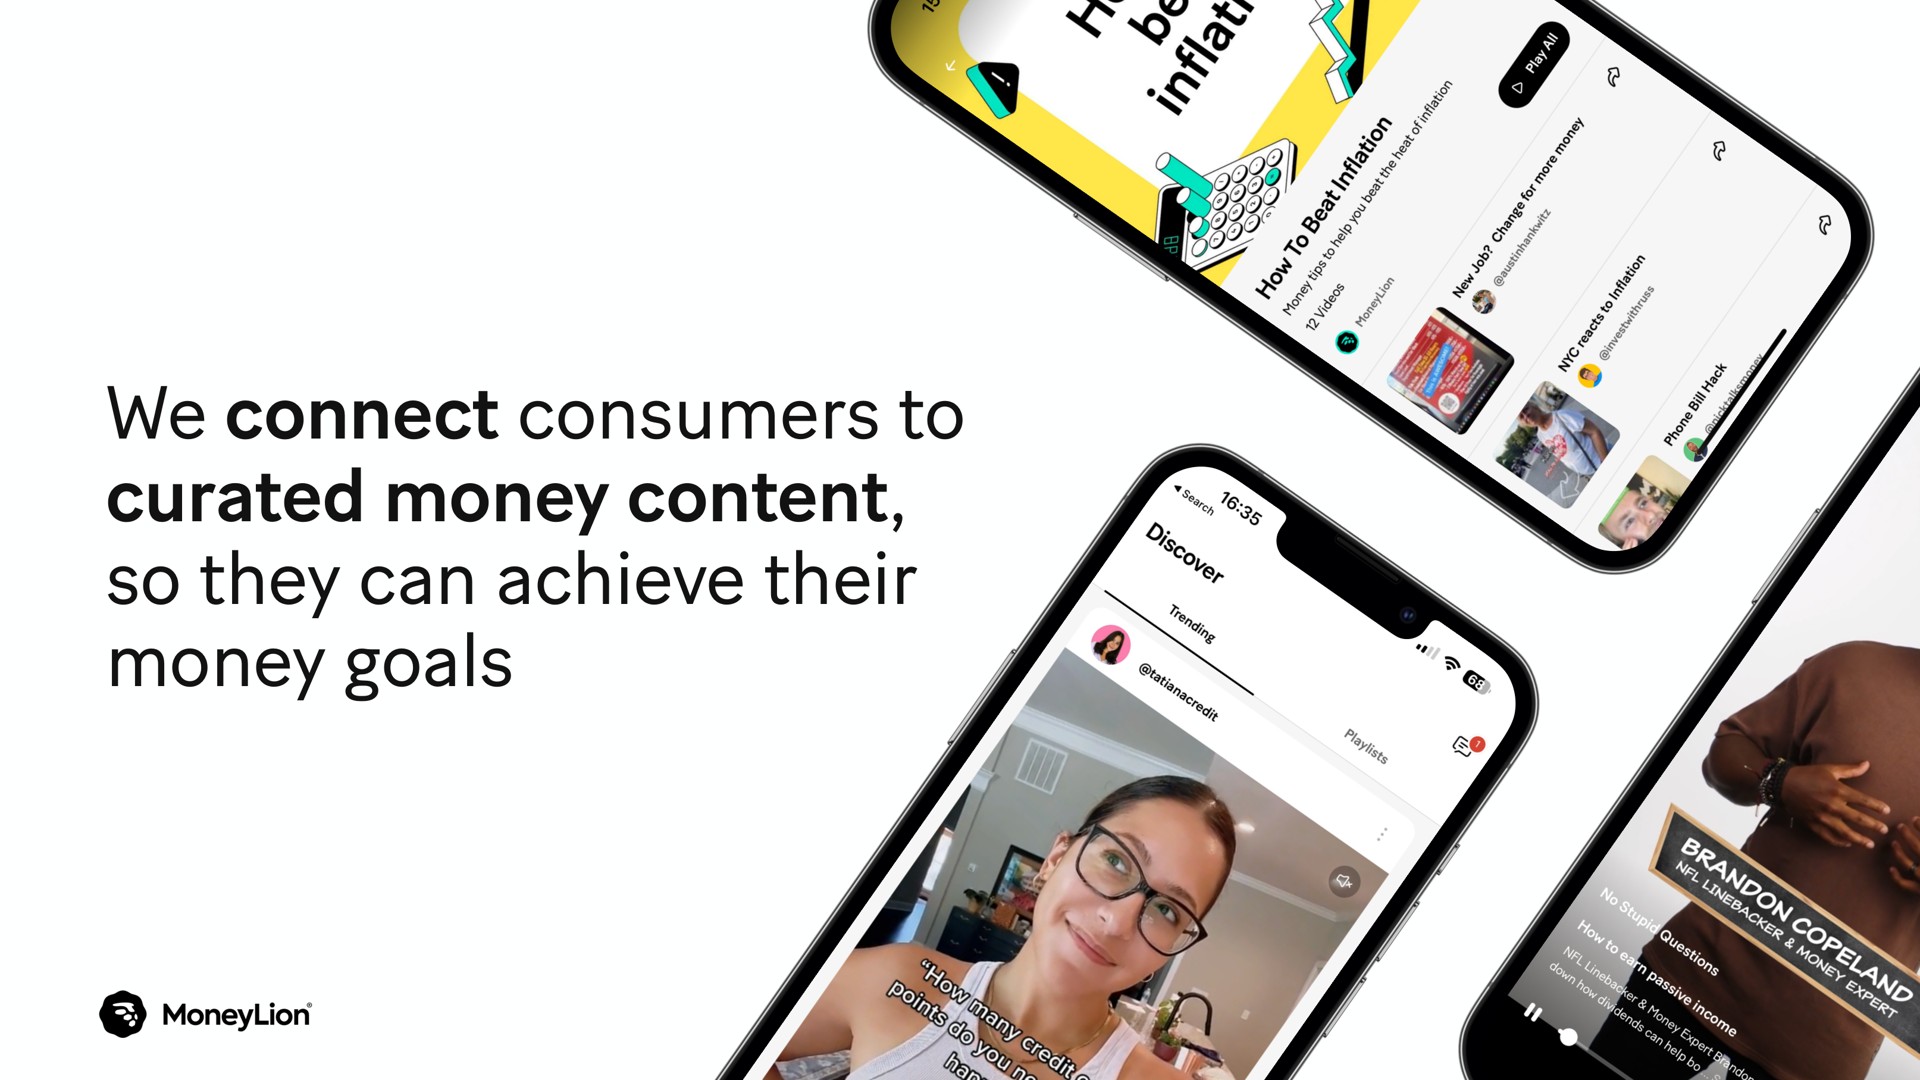 we connect consumers to money content so they can achieve their money goals | MoneyLion